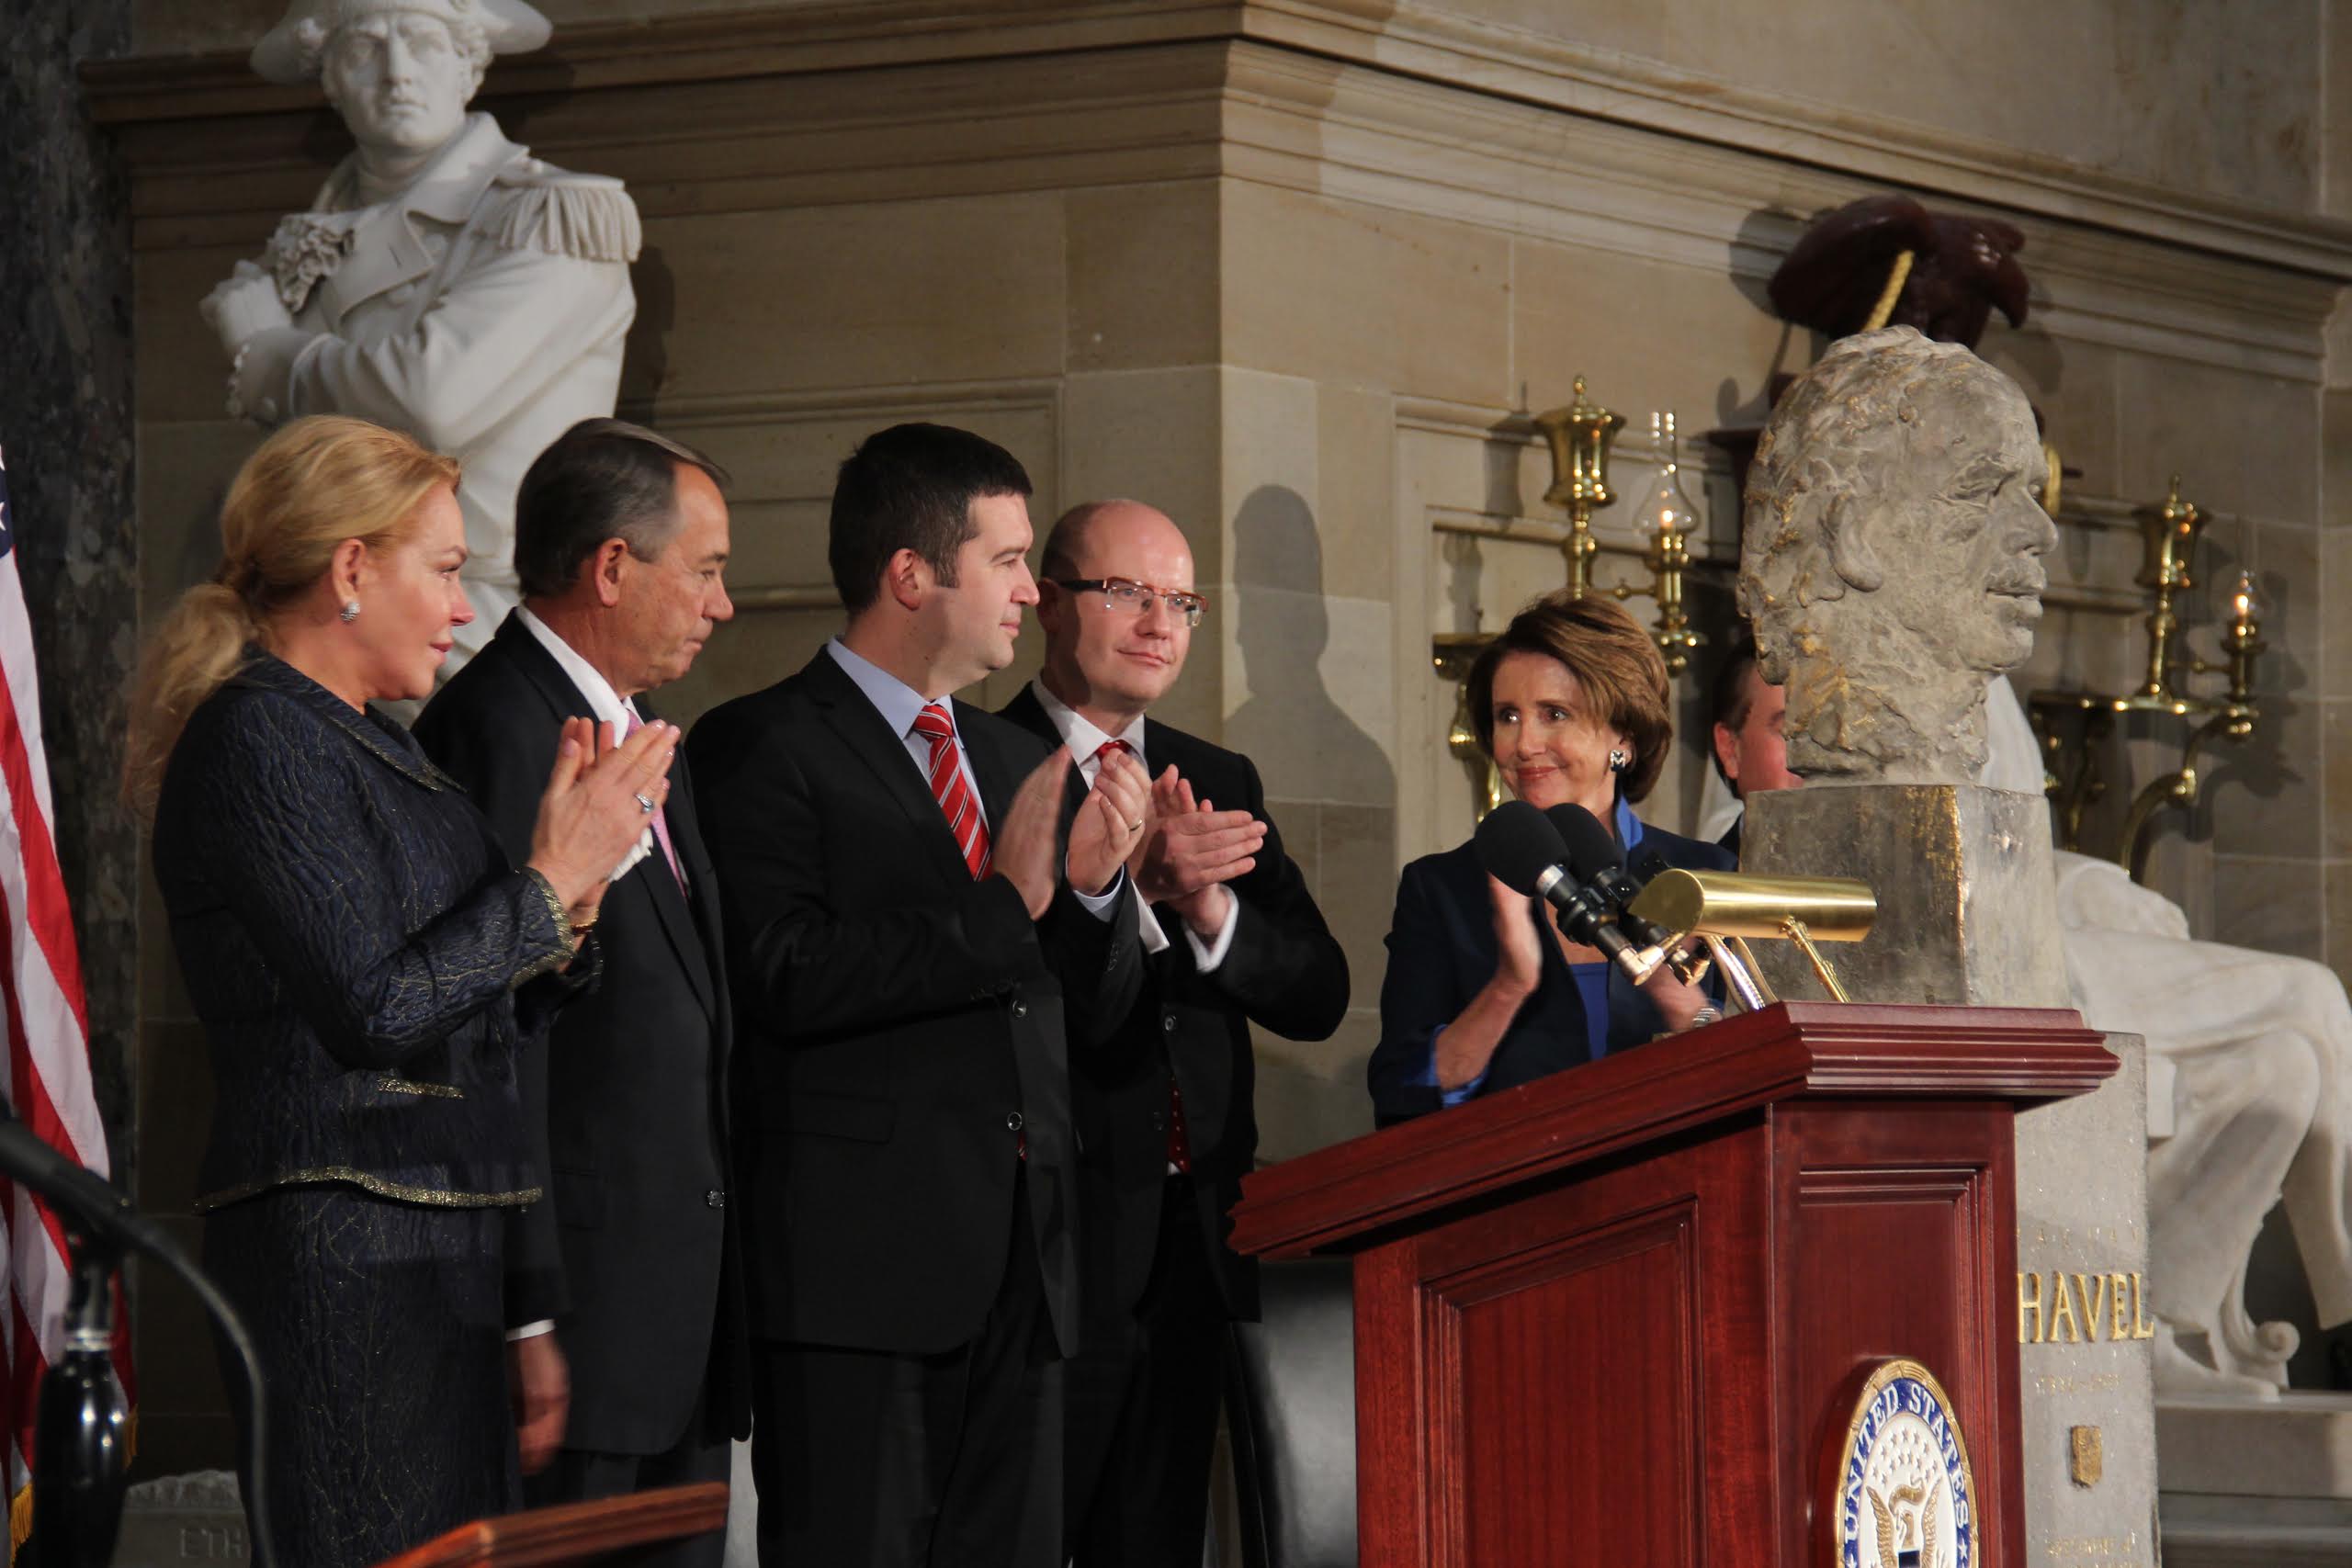 Havel’s commitment to freedom honored at Capitol